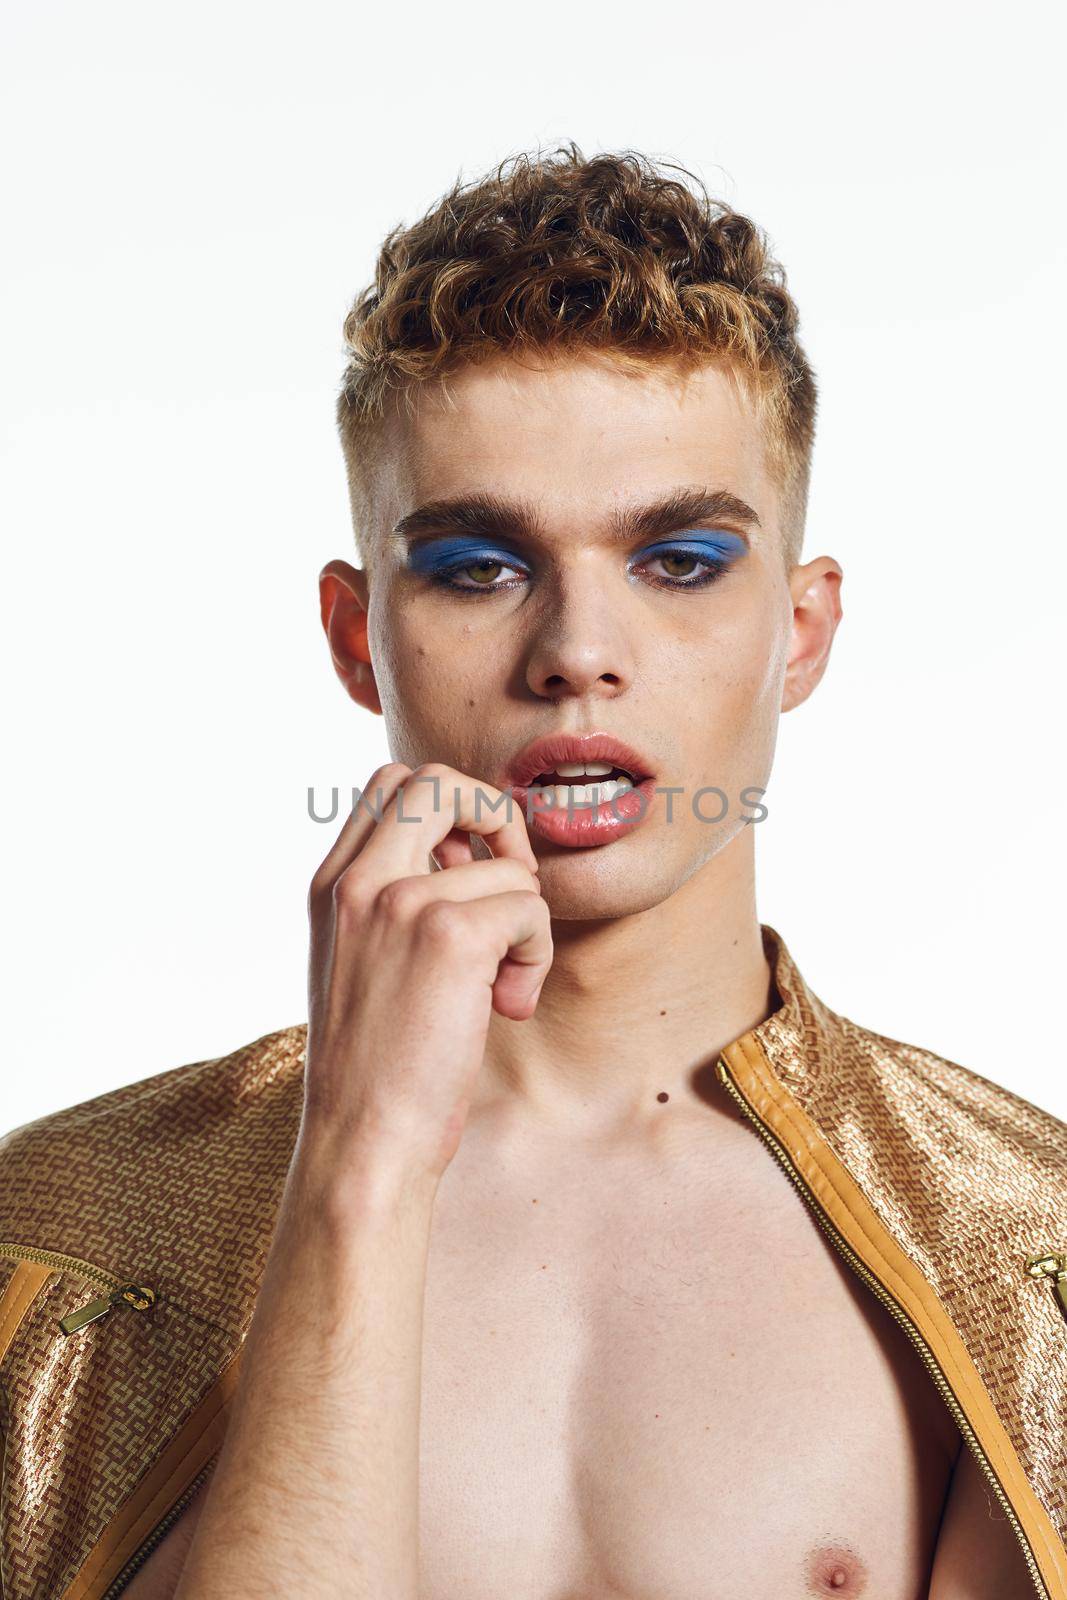 guy with female makeup posing transgender lgbt community. High quality photo